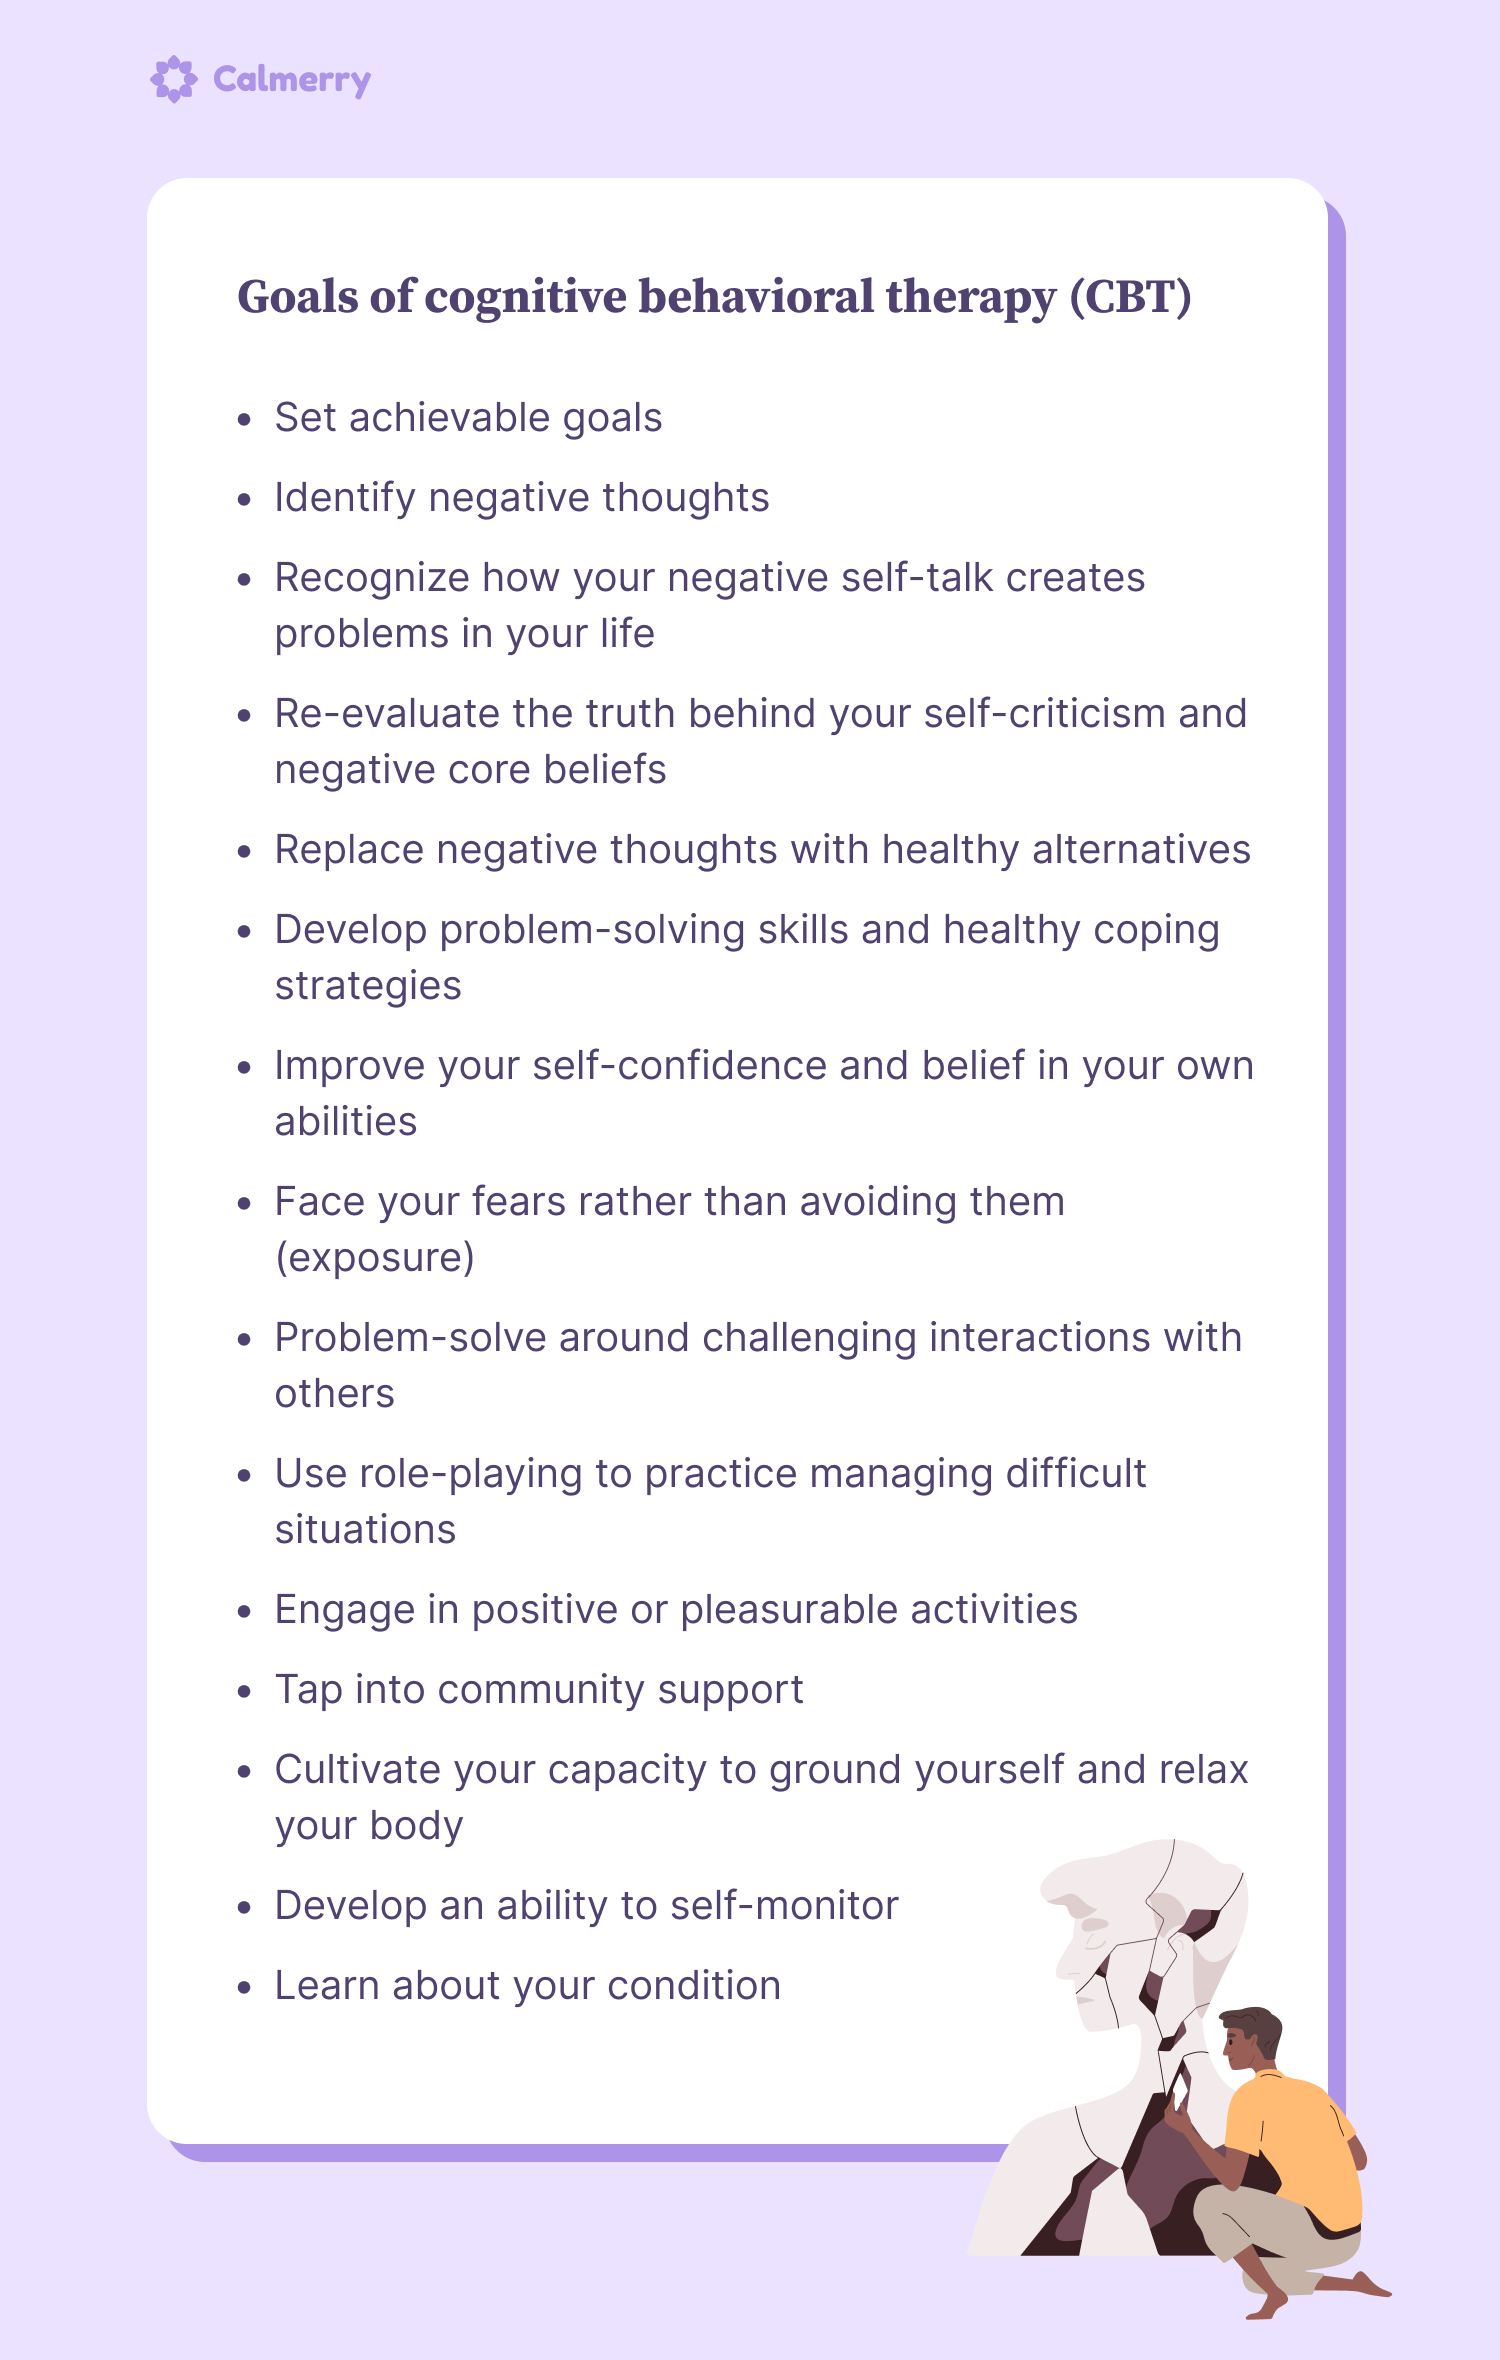 Goals of cognitive behavioral therapy (CBT)